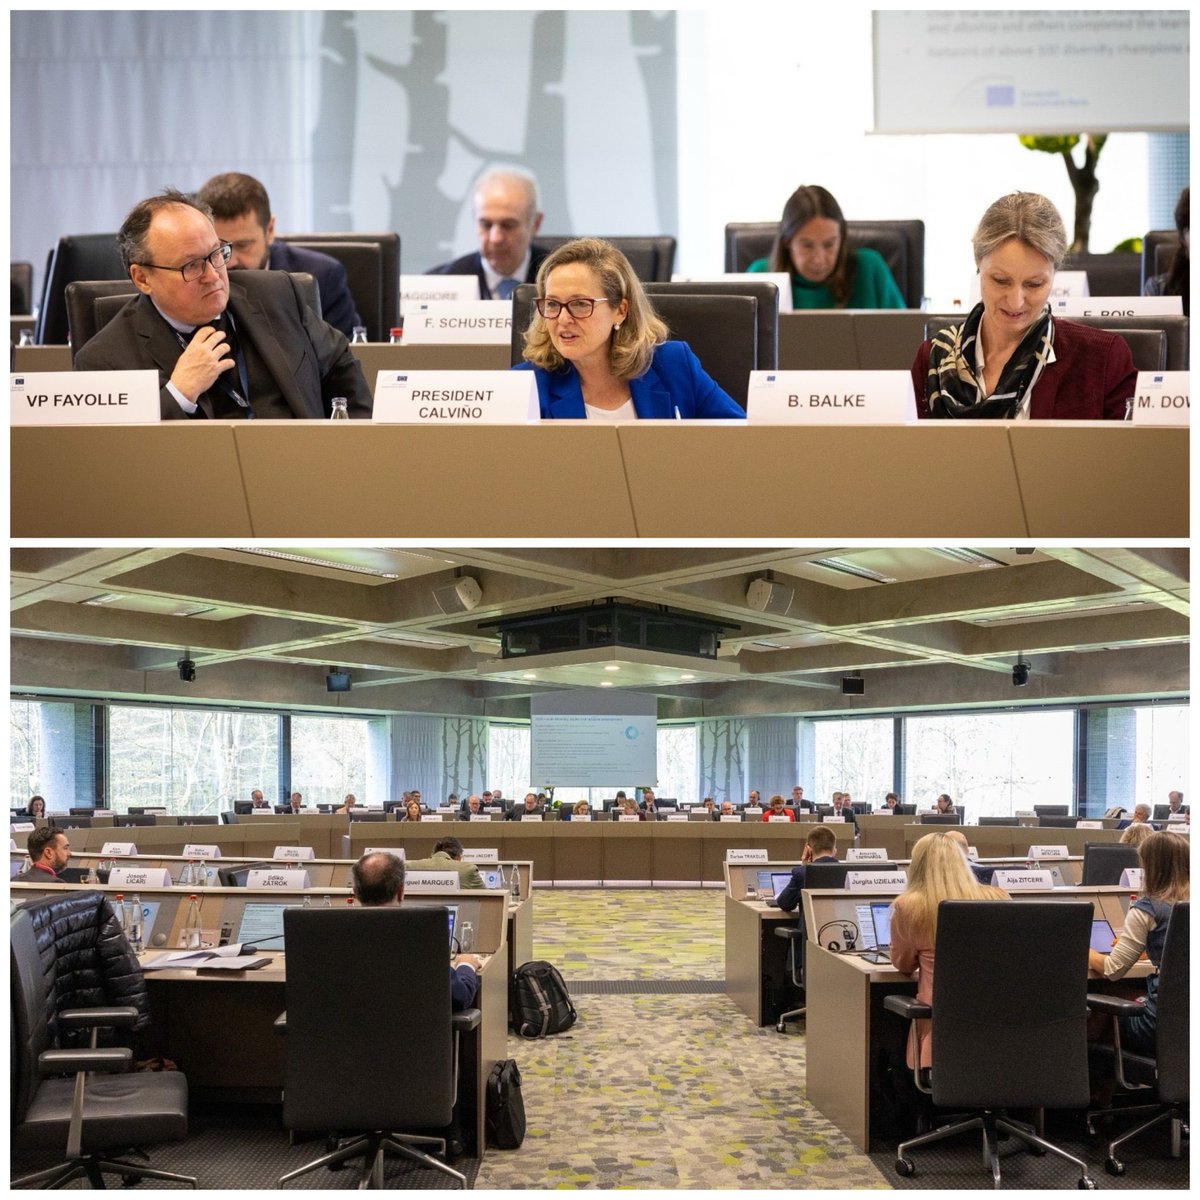 Very productive meeting of the @EIB Board of Directors. More than €5 bn of financing approved for projects in 🇨🇿🇫🇮🇫🇷🇩🇪🇬🇷🇮🇹🇳🇱🇵🇱🇪🇸🇵🇹🇷🇴🇸🇪🇺🇦 to deliver on EU priorities, support competitiveness and improve people's lives. We are investing in Europe’s future.